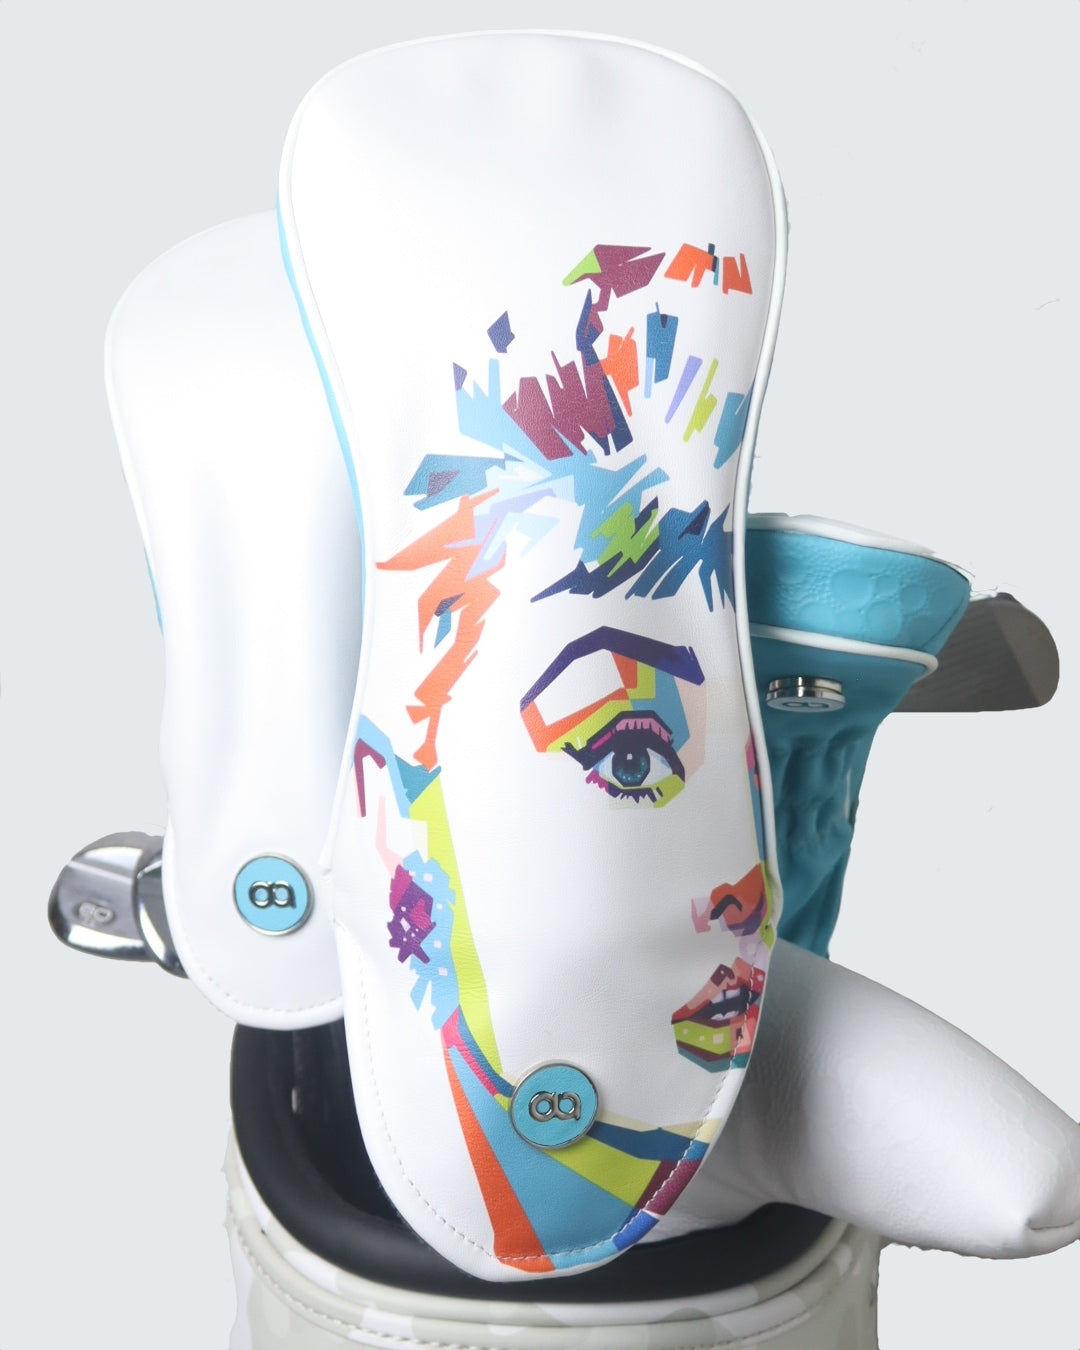 White and aqua blue leather headcover by David Alexander Golf